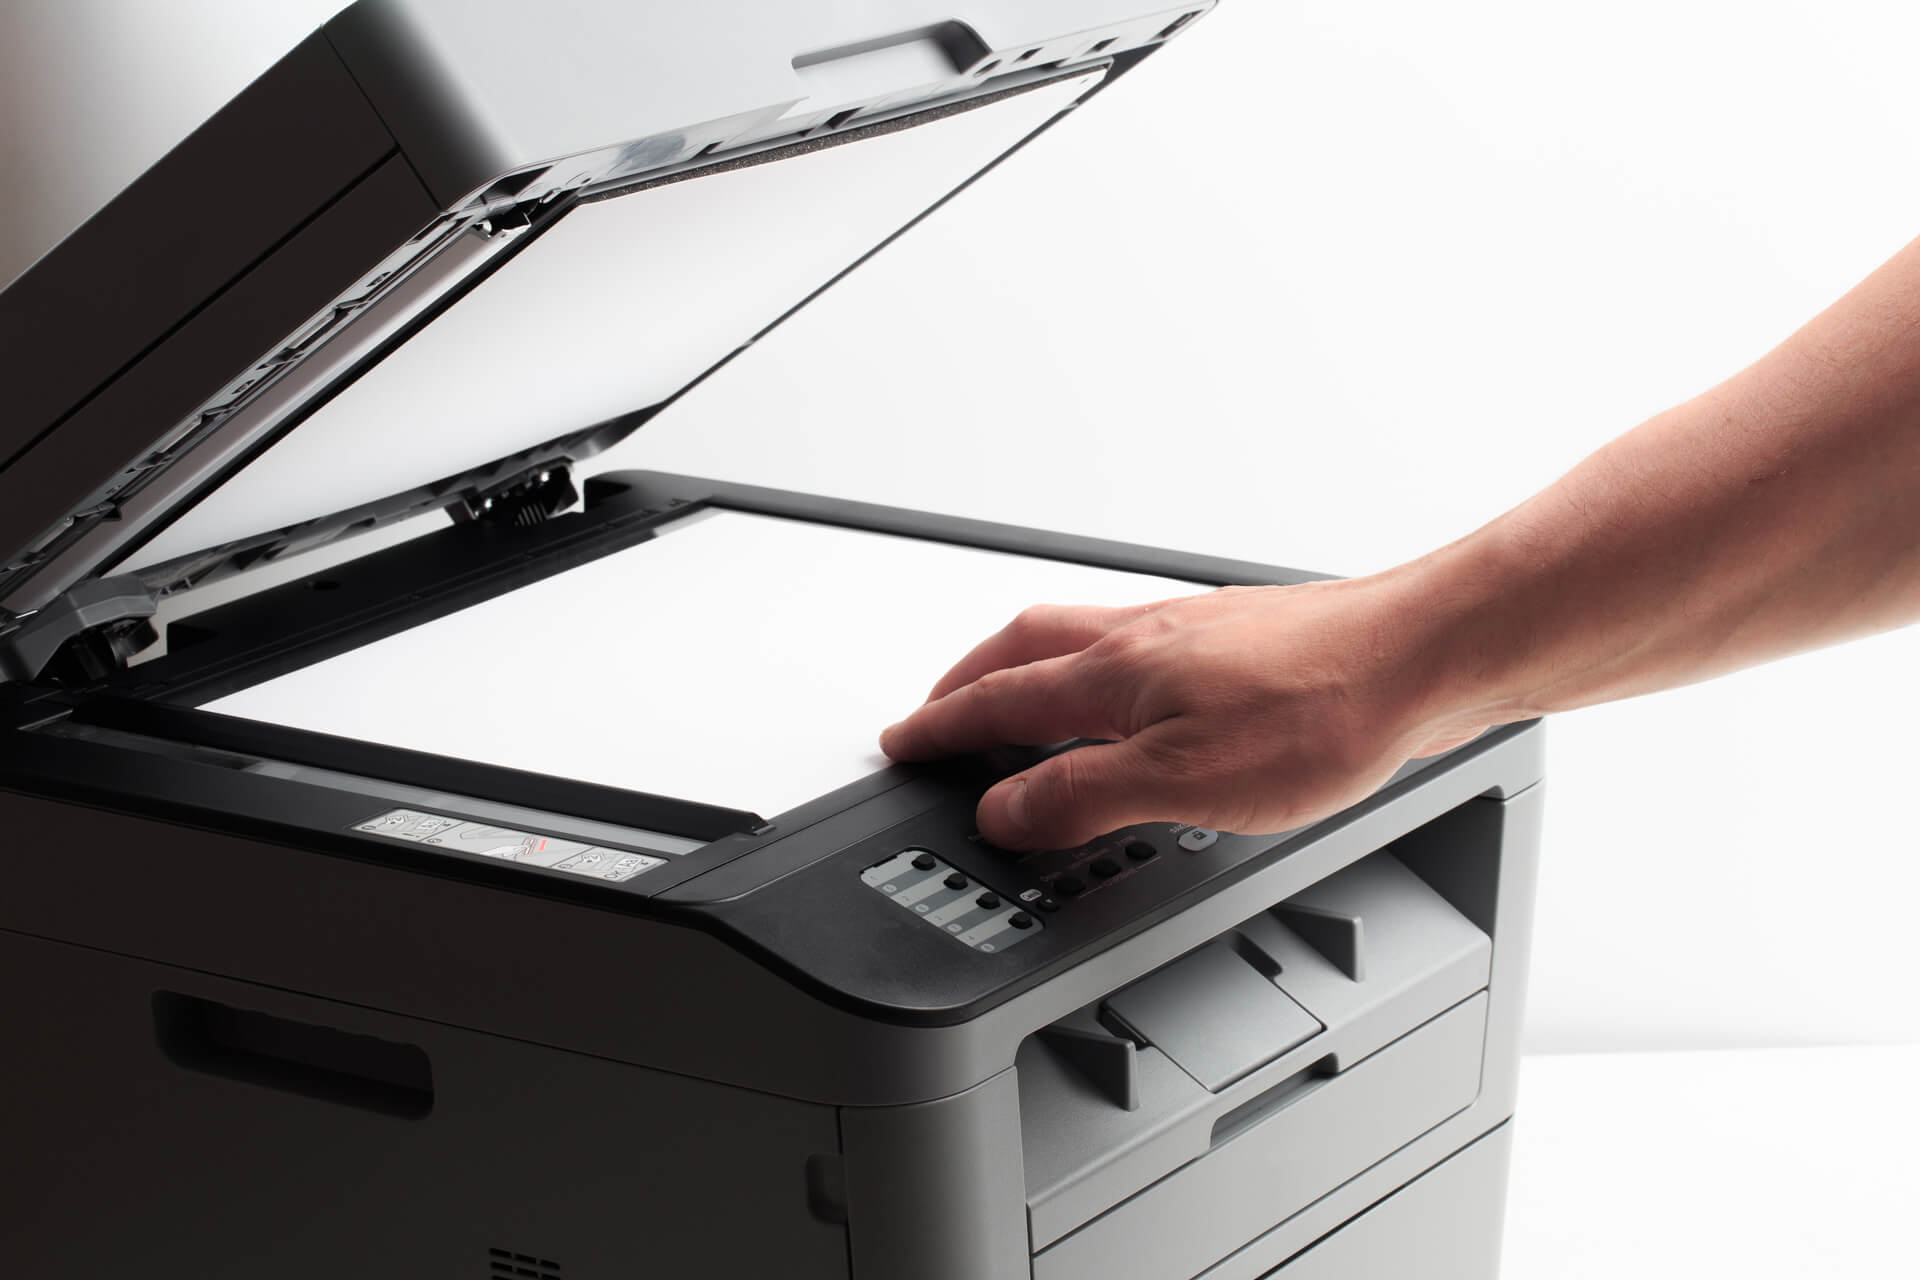 Buying or renting a printer?